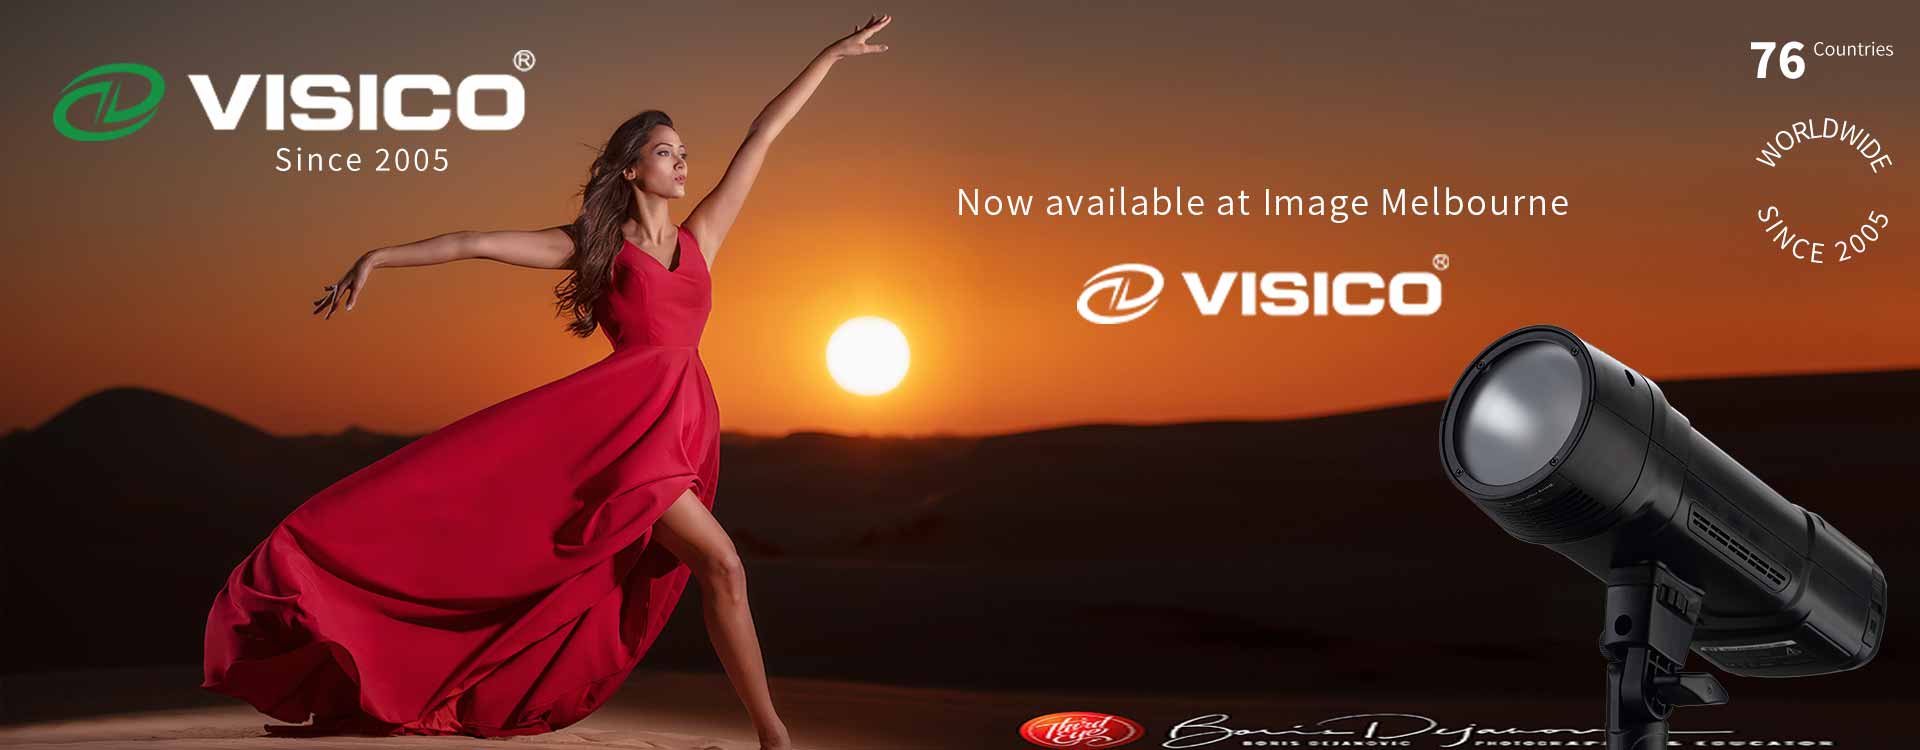 Visico Flash & LEDs now available